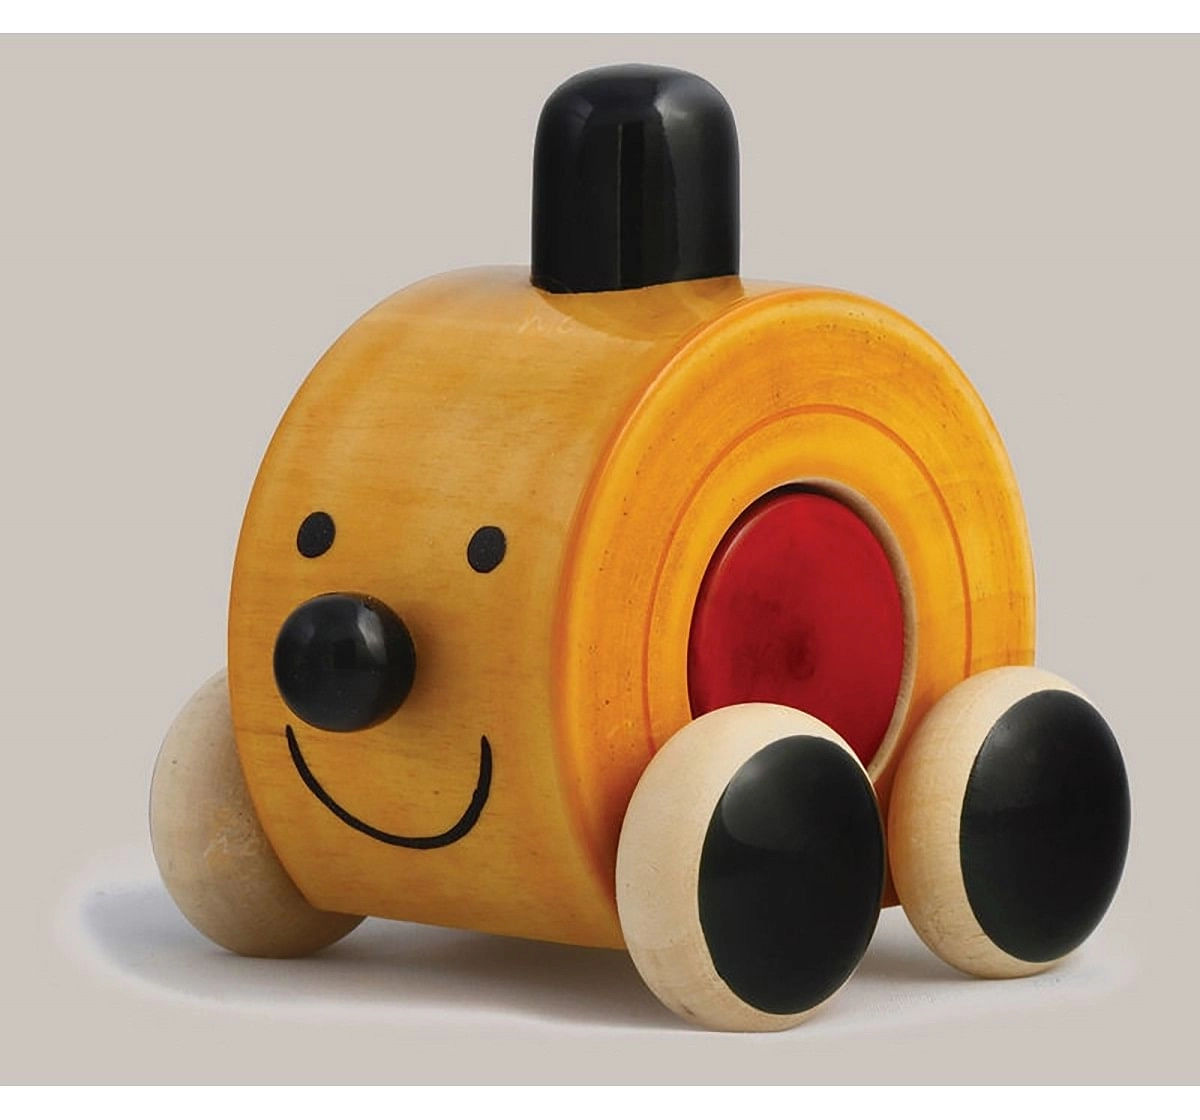 Fairkraft Creations Handmade Wooden Moee Push Toy 1 Wooden Toys for Kids age 1Y+ (Red)